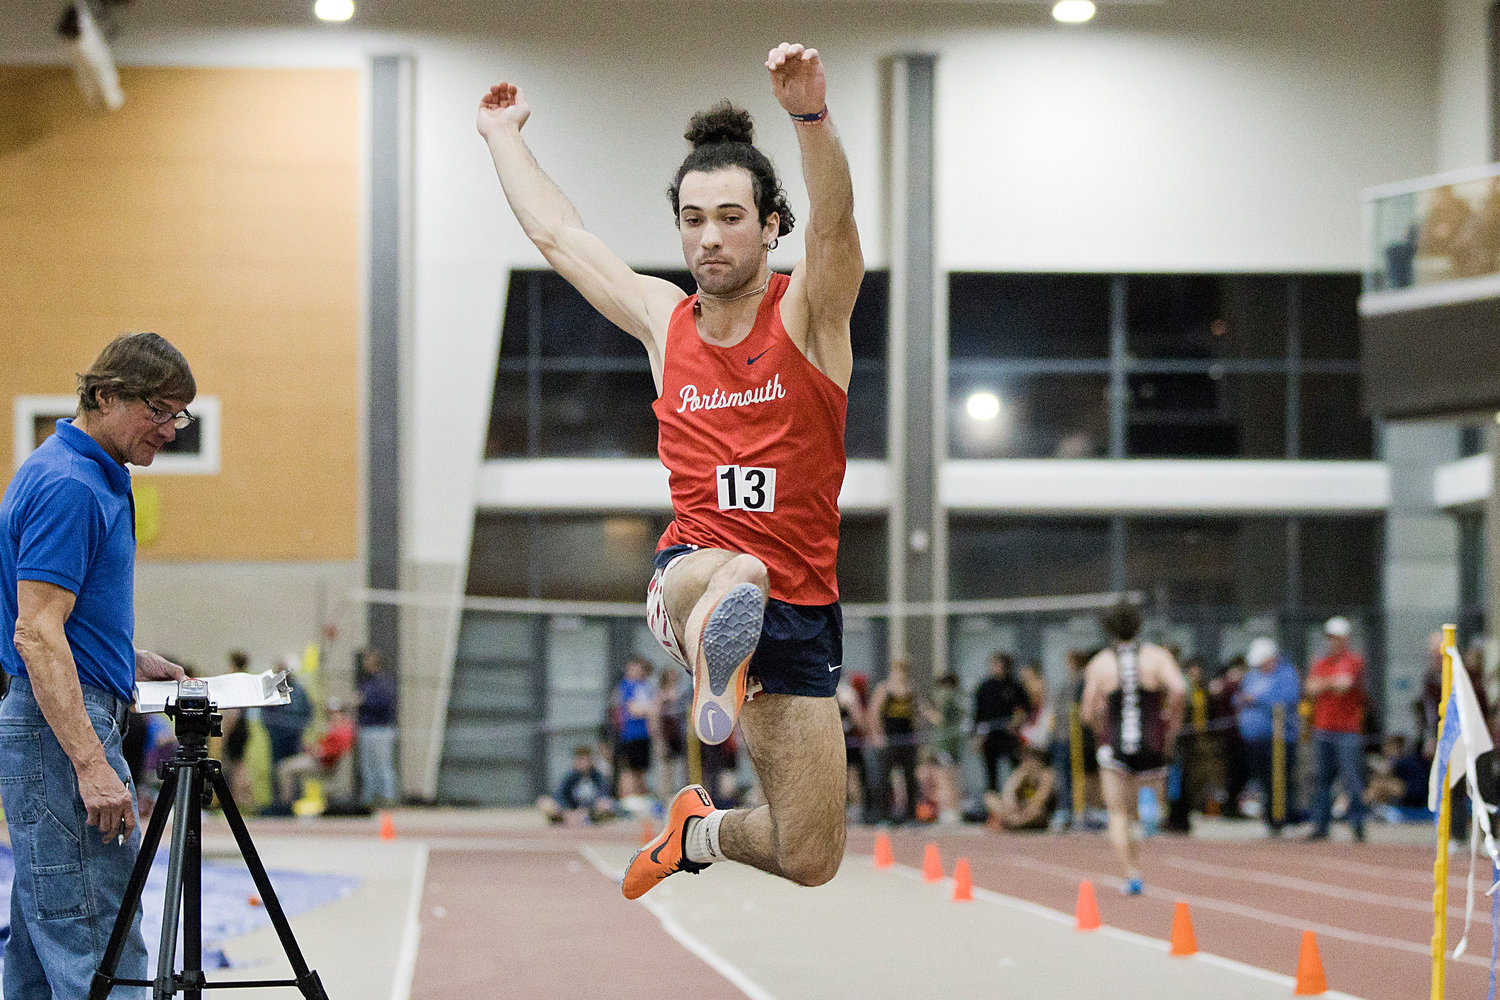 The Patriots’ Nikolai Loyola leaps toward the sand while competing in the long jump.